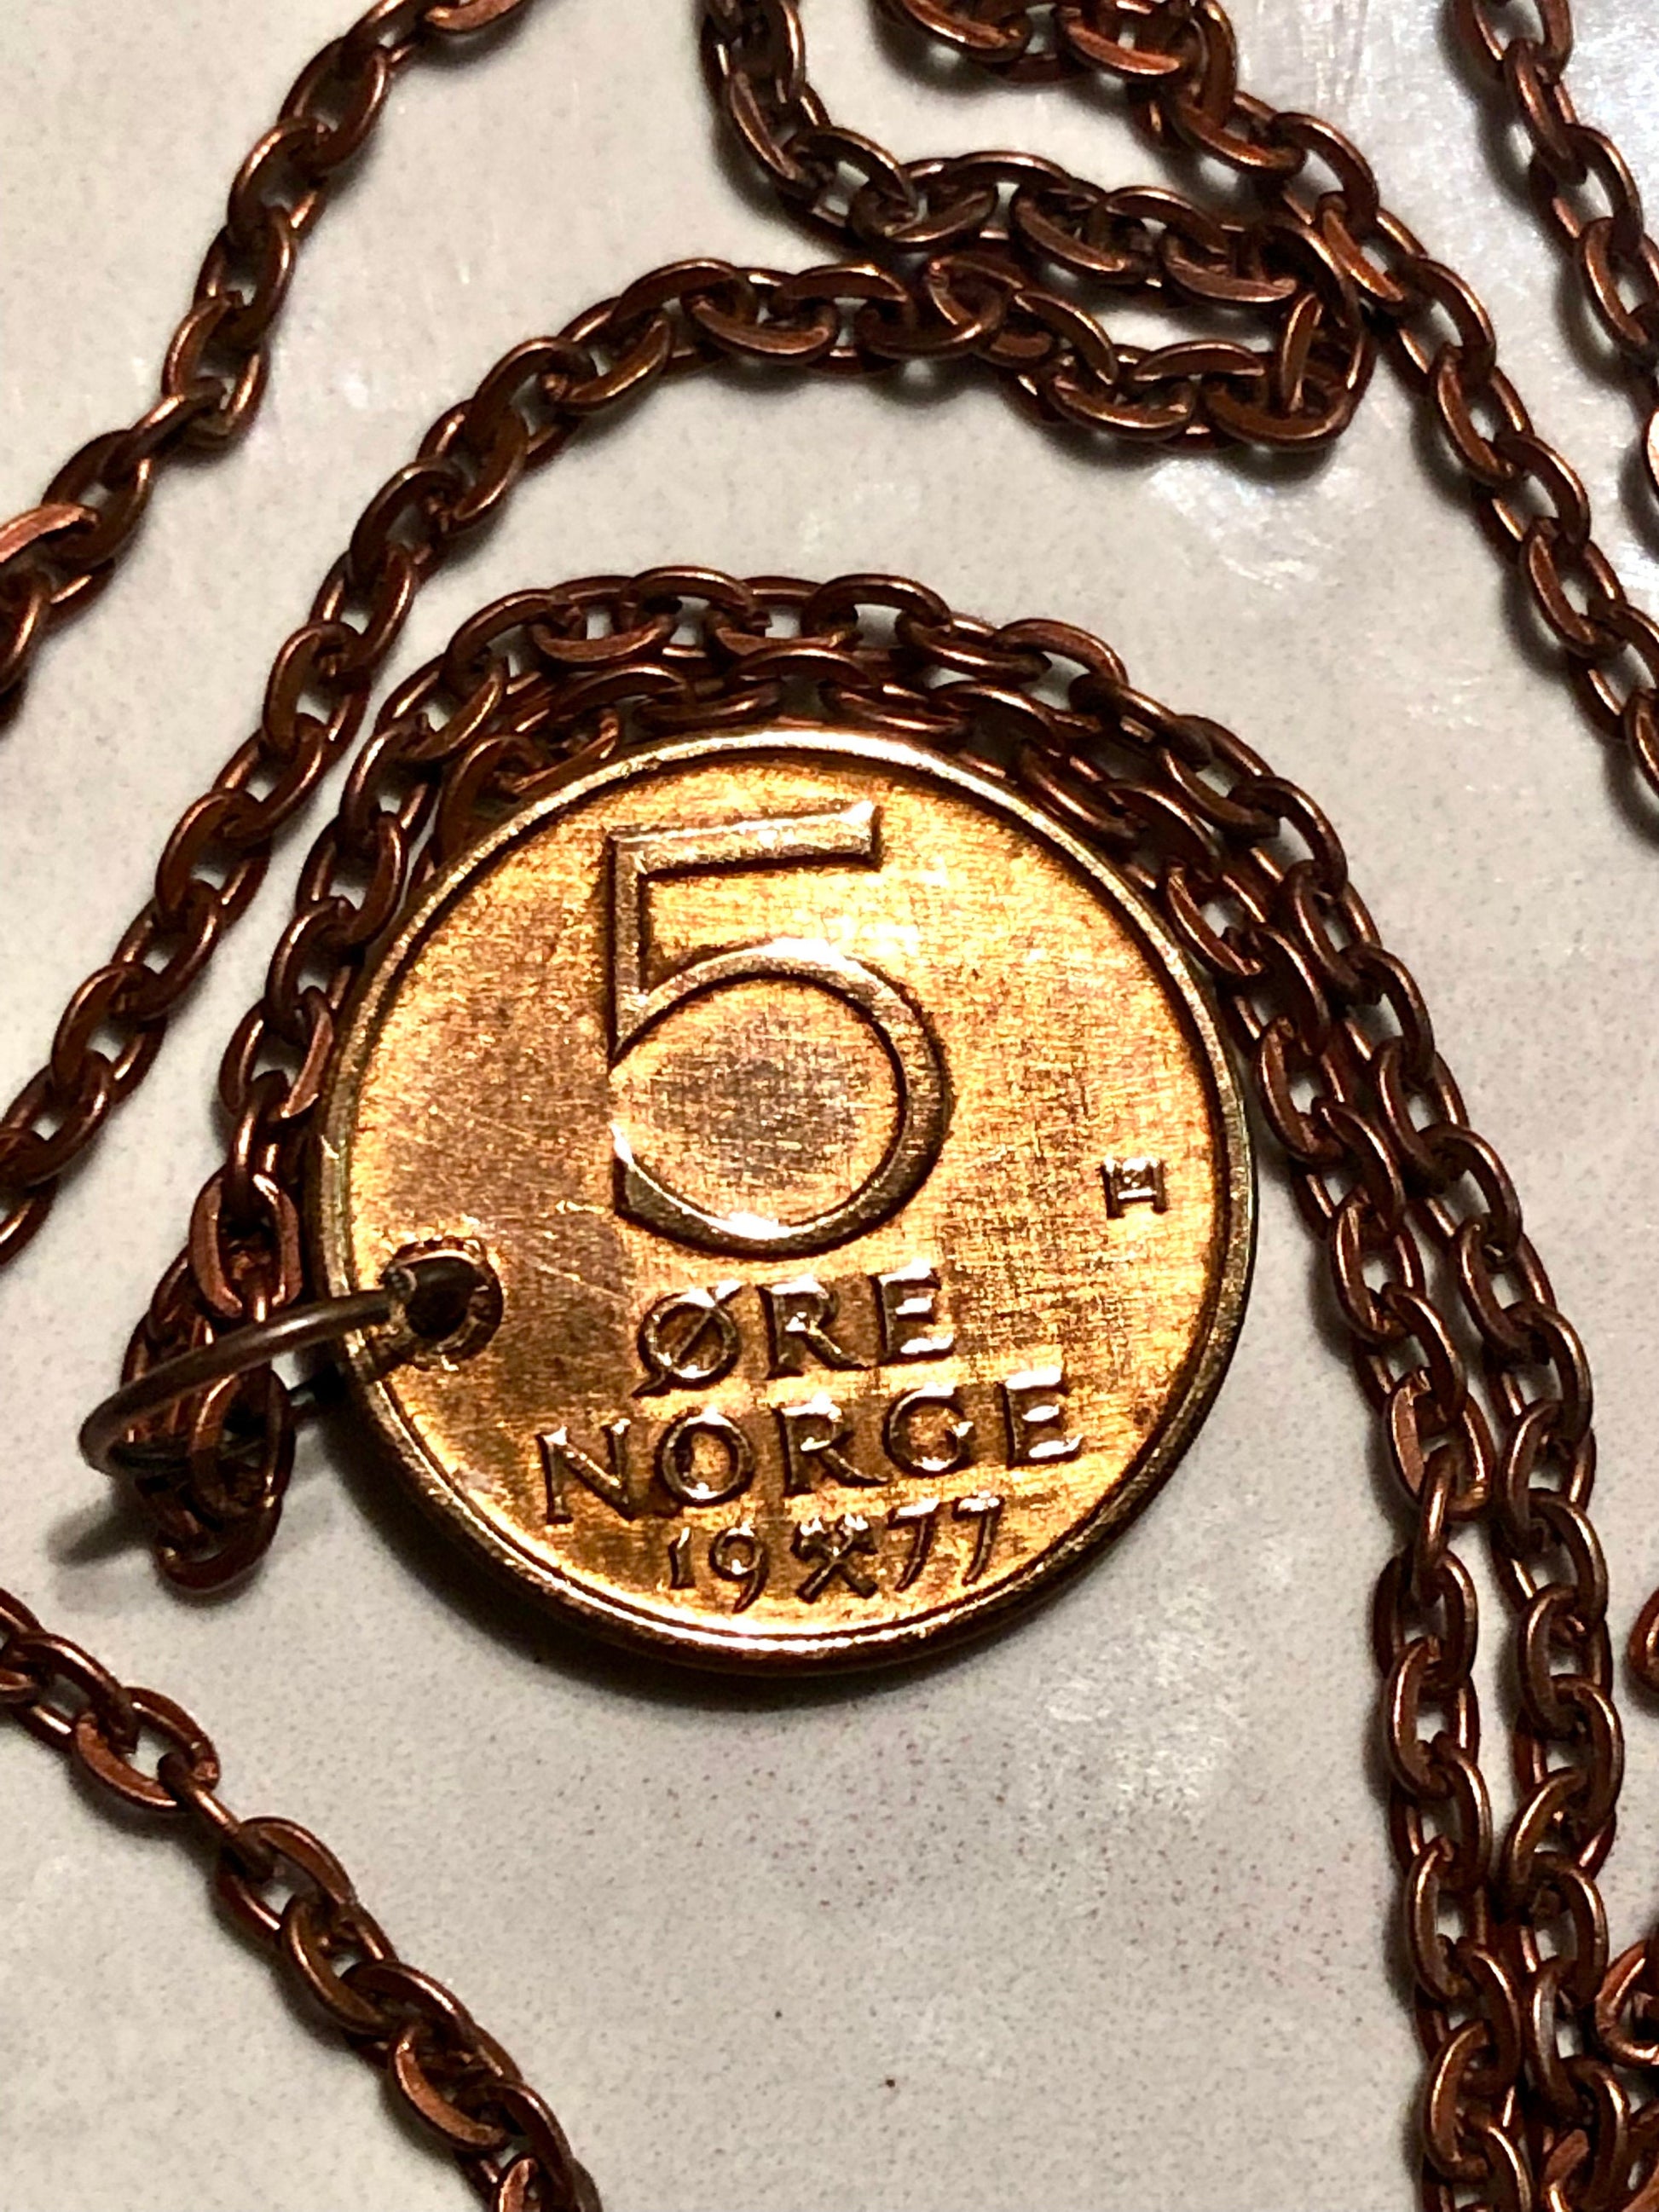 Norway 5 Ore Coin Necklace Pendant Norwegian Personal Old Vintage Handmade Jewelry Gift Friend Charm For Him Her World Coin Collector